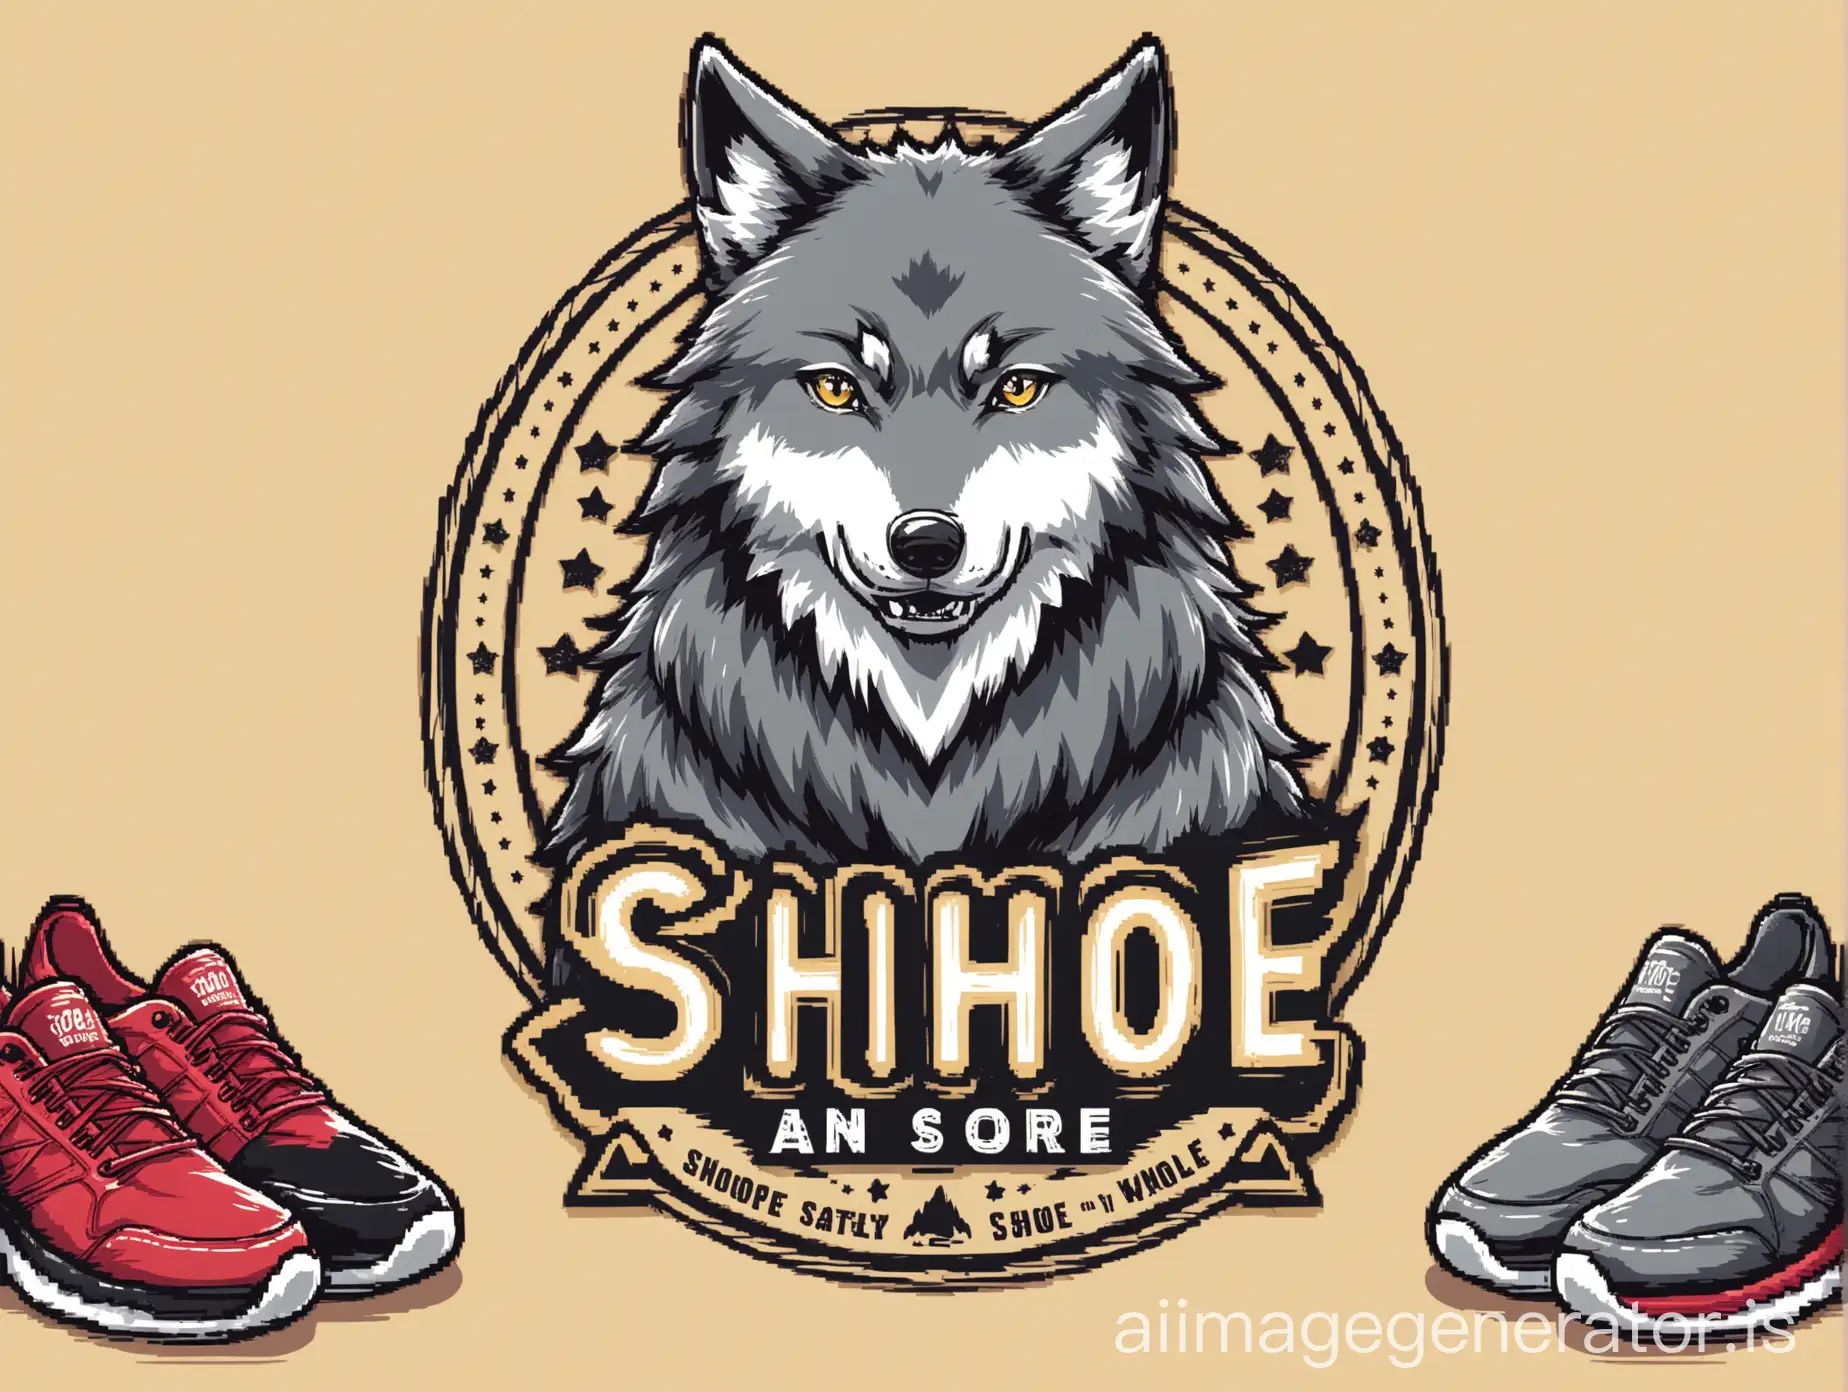 create an image for my shoe store that has a wolf as its mascot with a resolution of 1920x300 px.